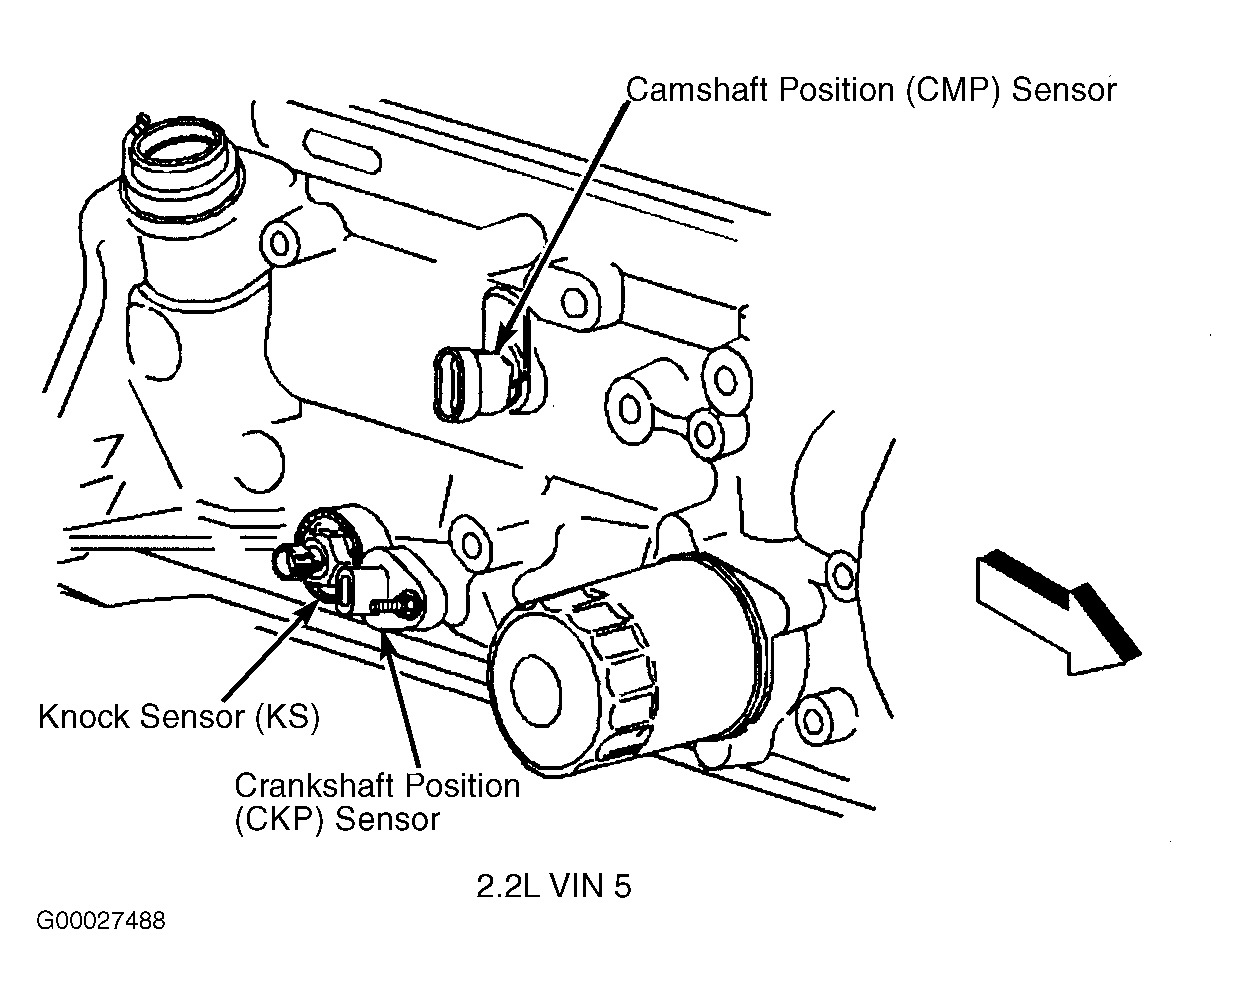 Chevrolet S10 Pickup 2002 - Component Locations -  Right Side Of Engine (2.2L VIN 5)